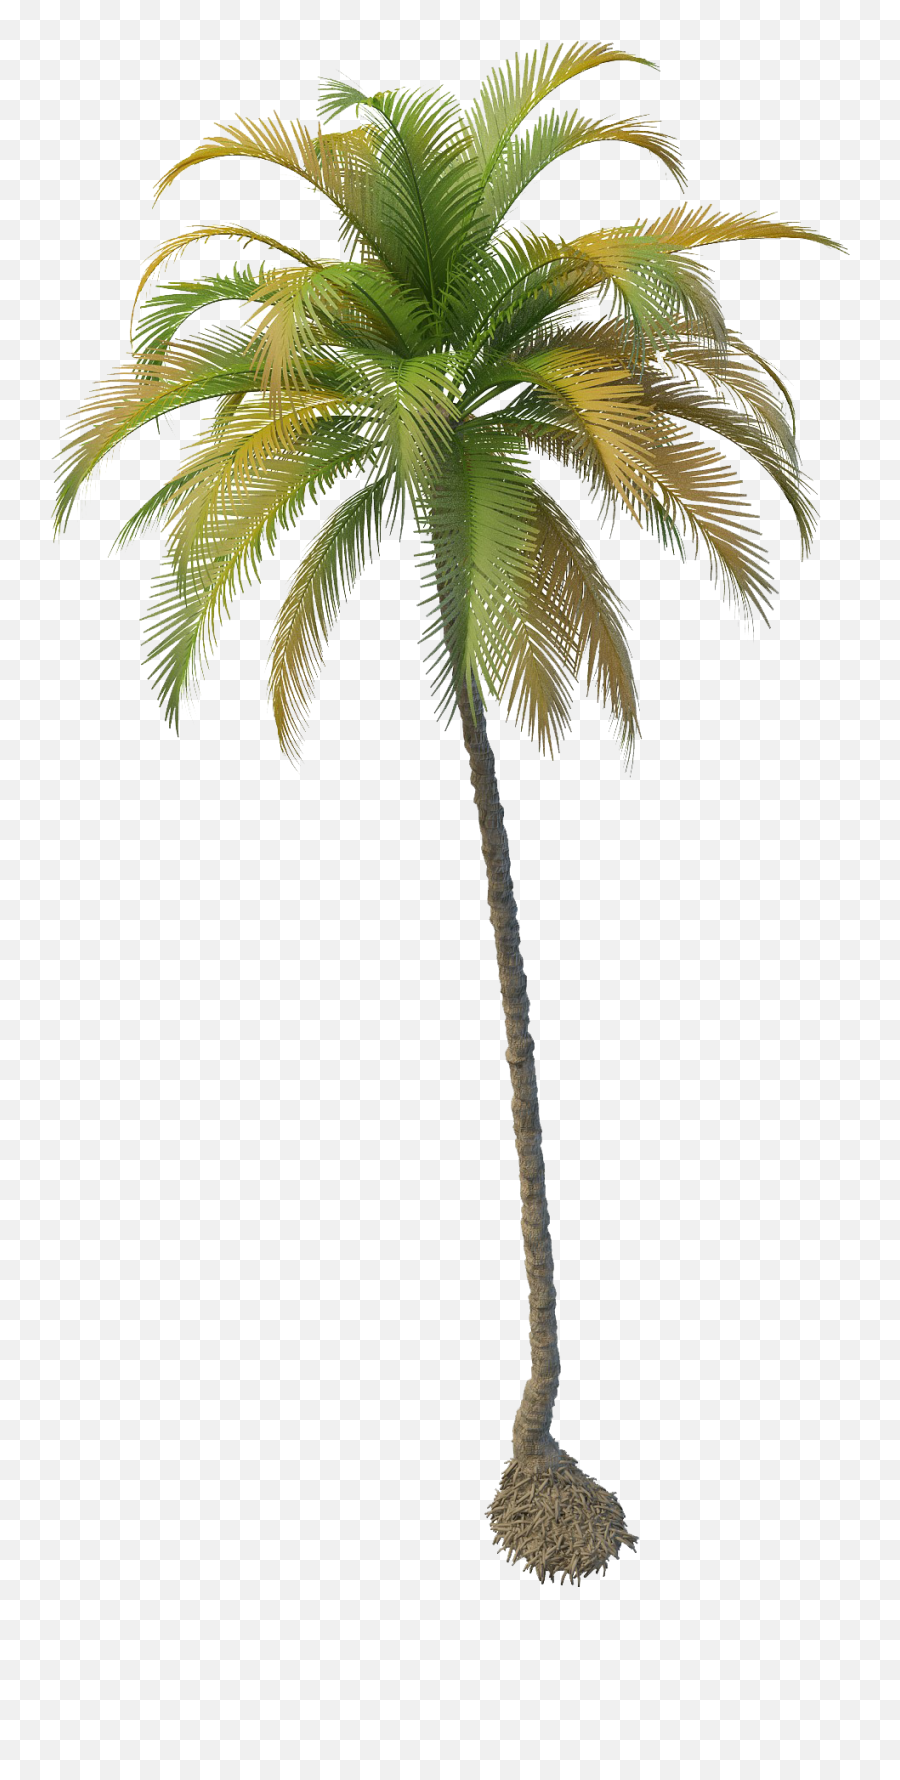 Coconut Trees - Coconut Tree Png File Emoji,Palm Trees Png